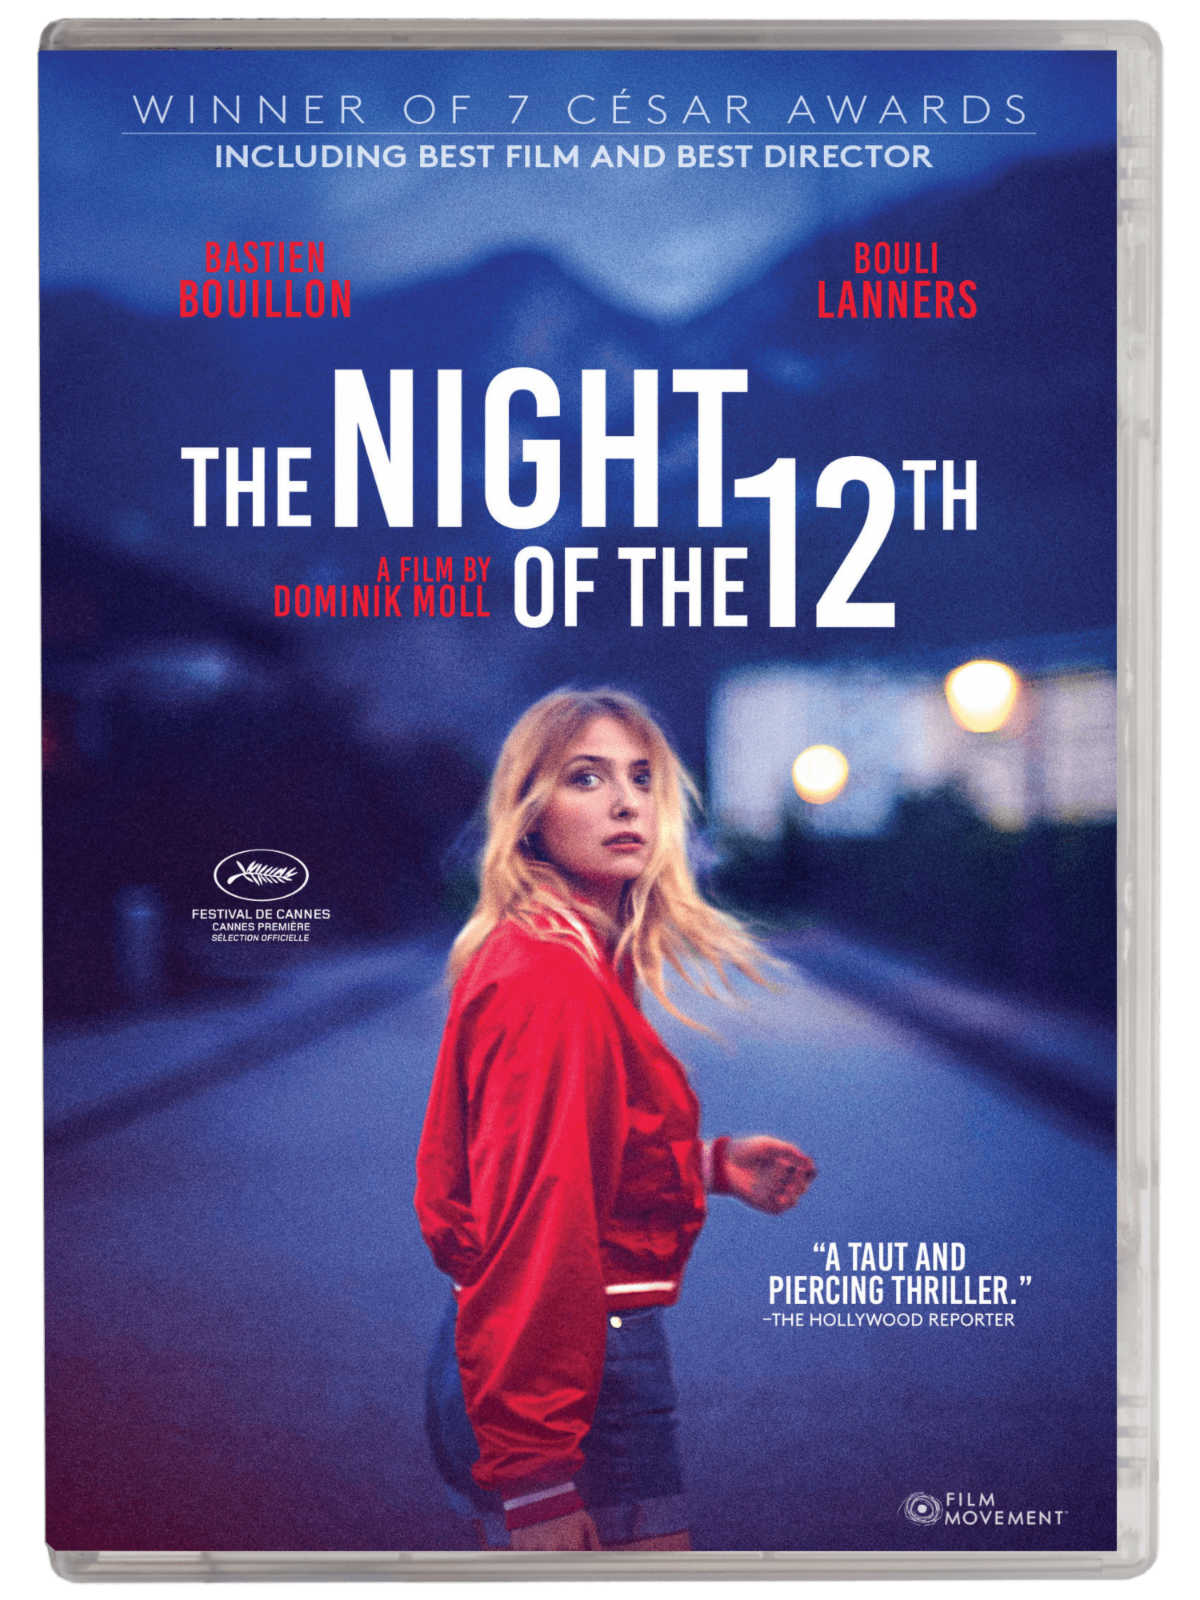 The Night of the 12th is a smart, suspenseful, and thought-provoking French crime thriller that explores the dark side of human nature and internalized bias in the investigation of a young woman's murder. With stunning cinematography and a captivating story, this film is a must-see for fans of crime thrillers and French cinema.